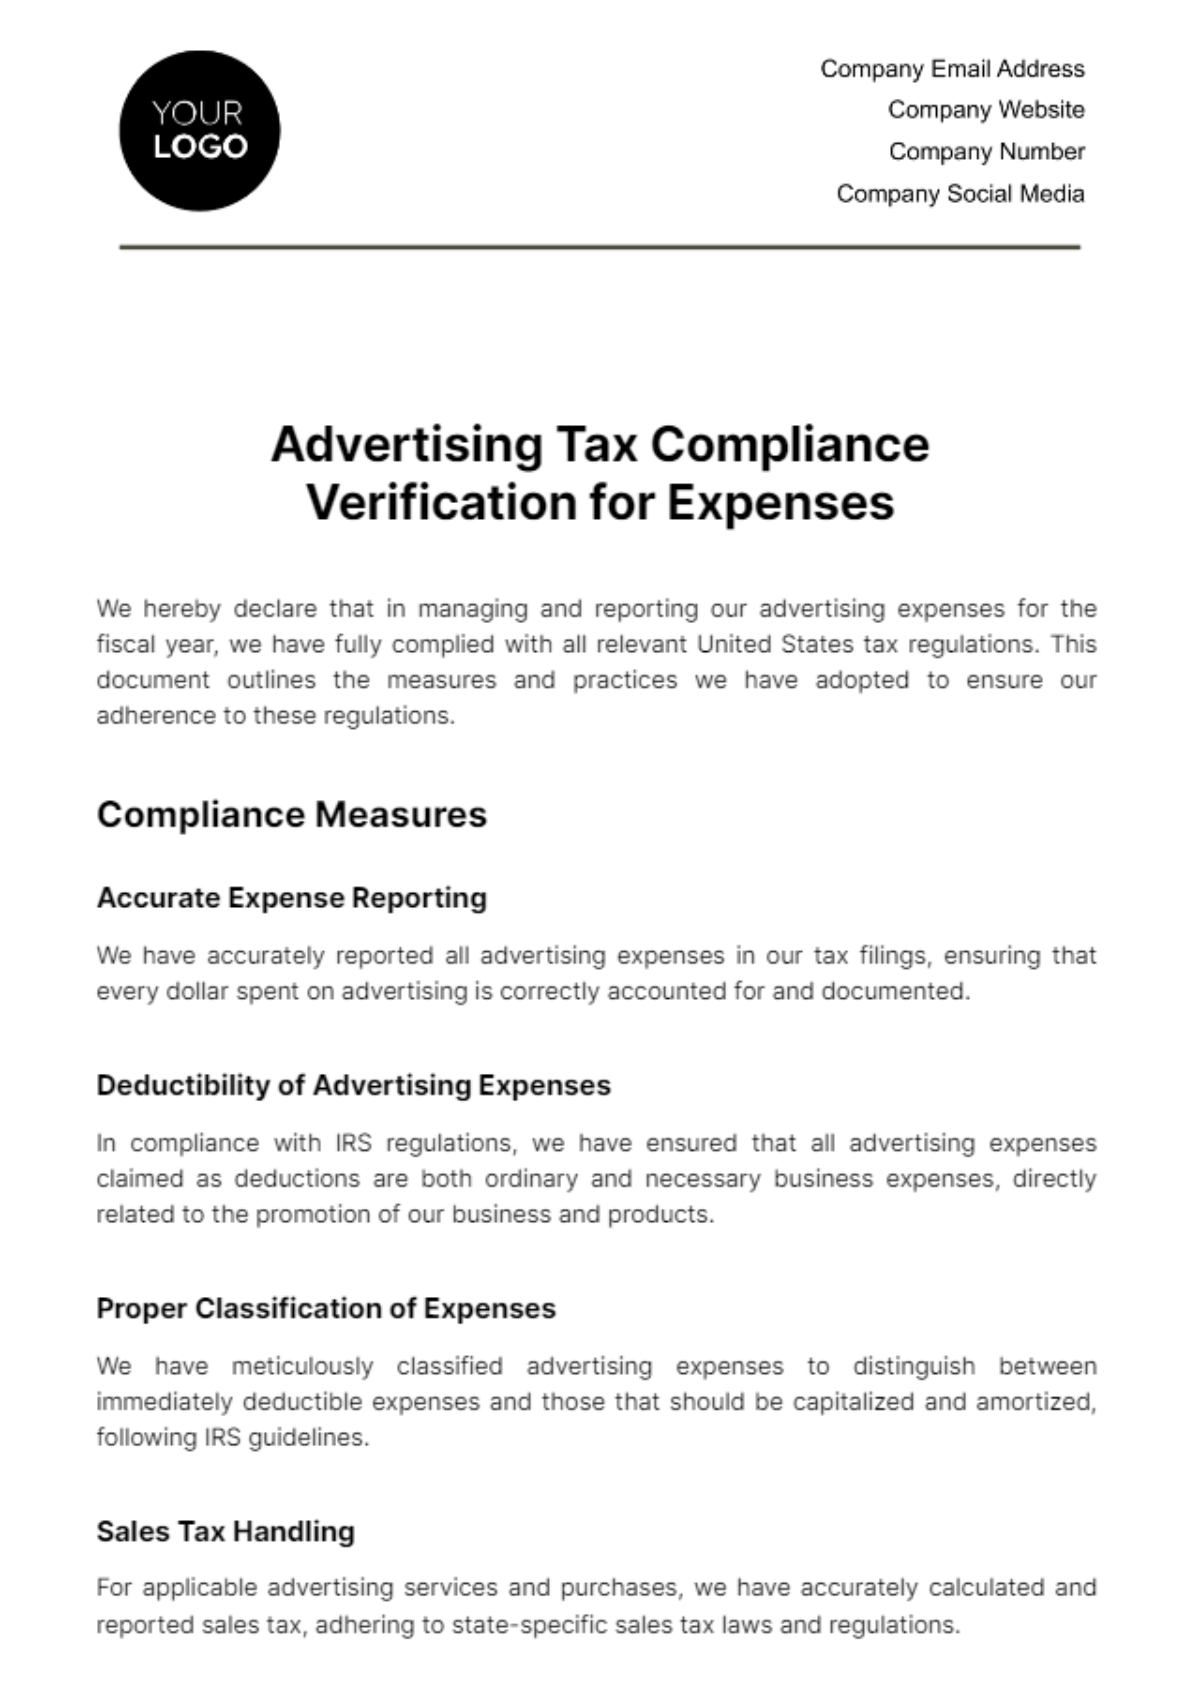 Free Advertising Tax Compliance Verification for Expenses Template